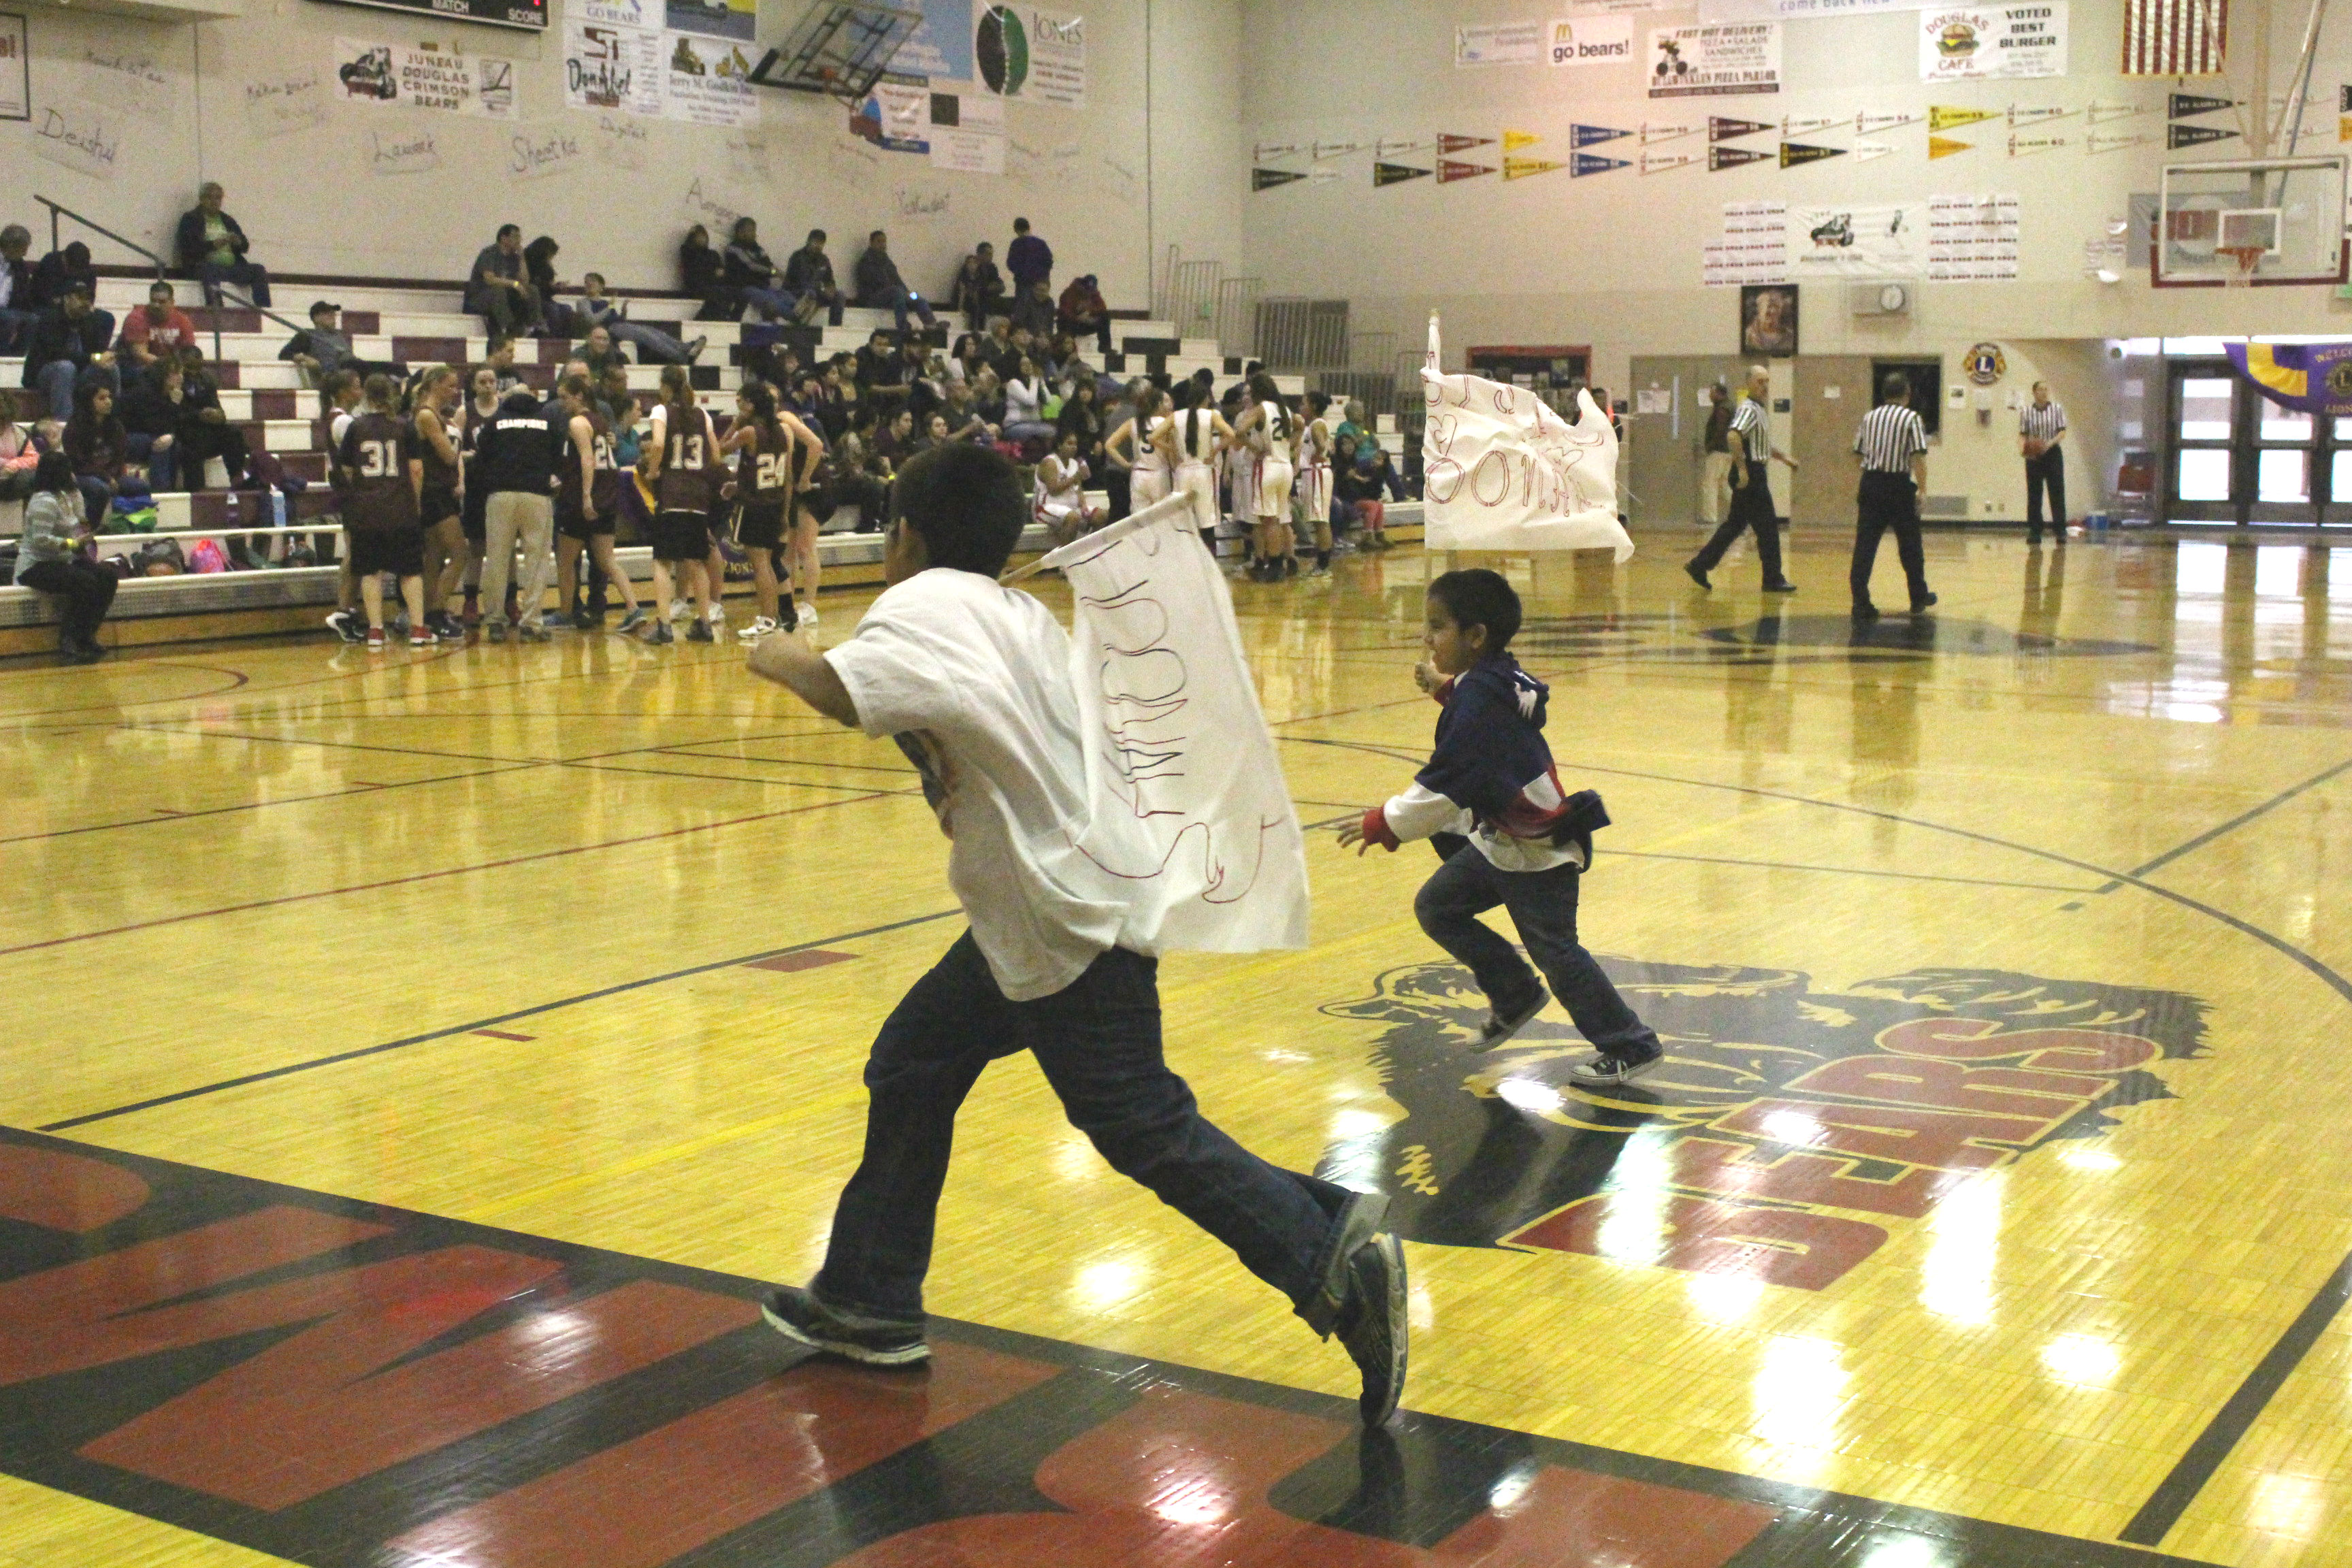 Kids run through court during a game break with homemade Hoonah flags. (Photo by Elizabeth Jenkins/KTOO